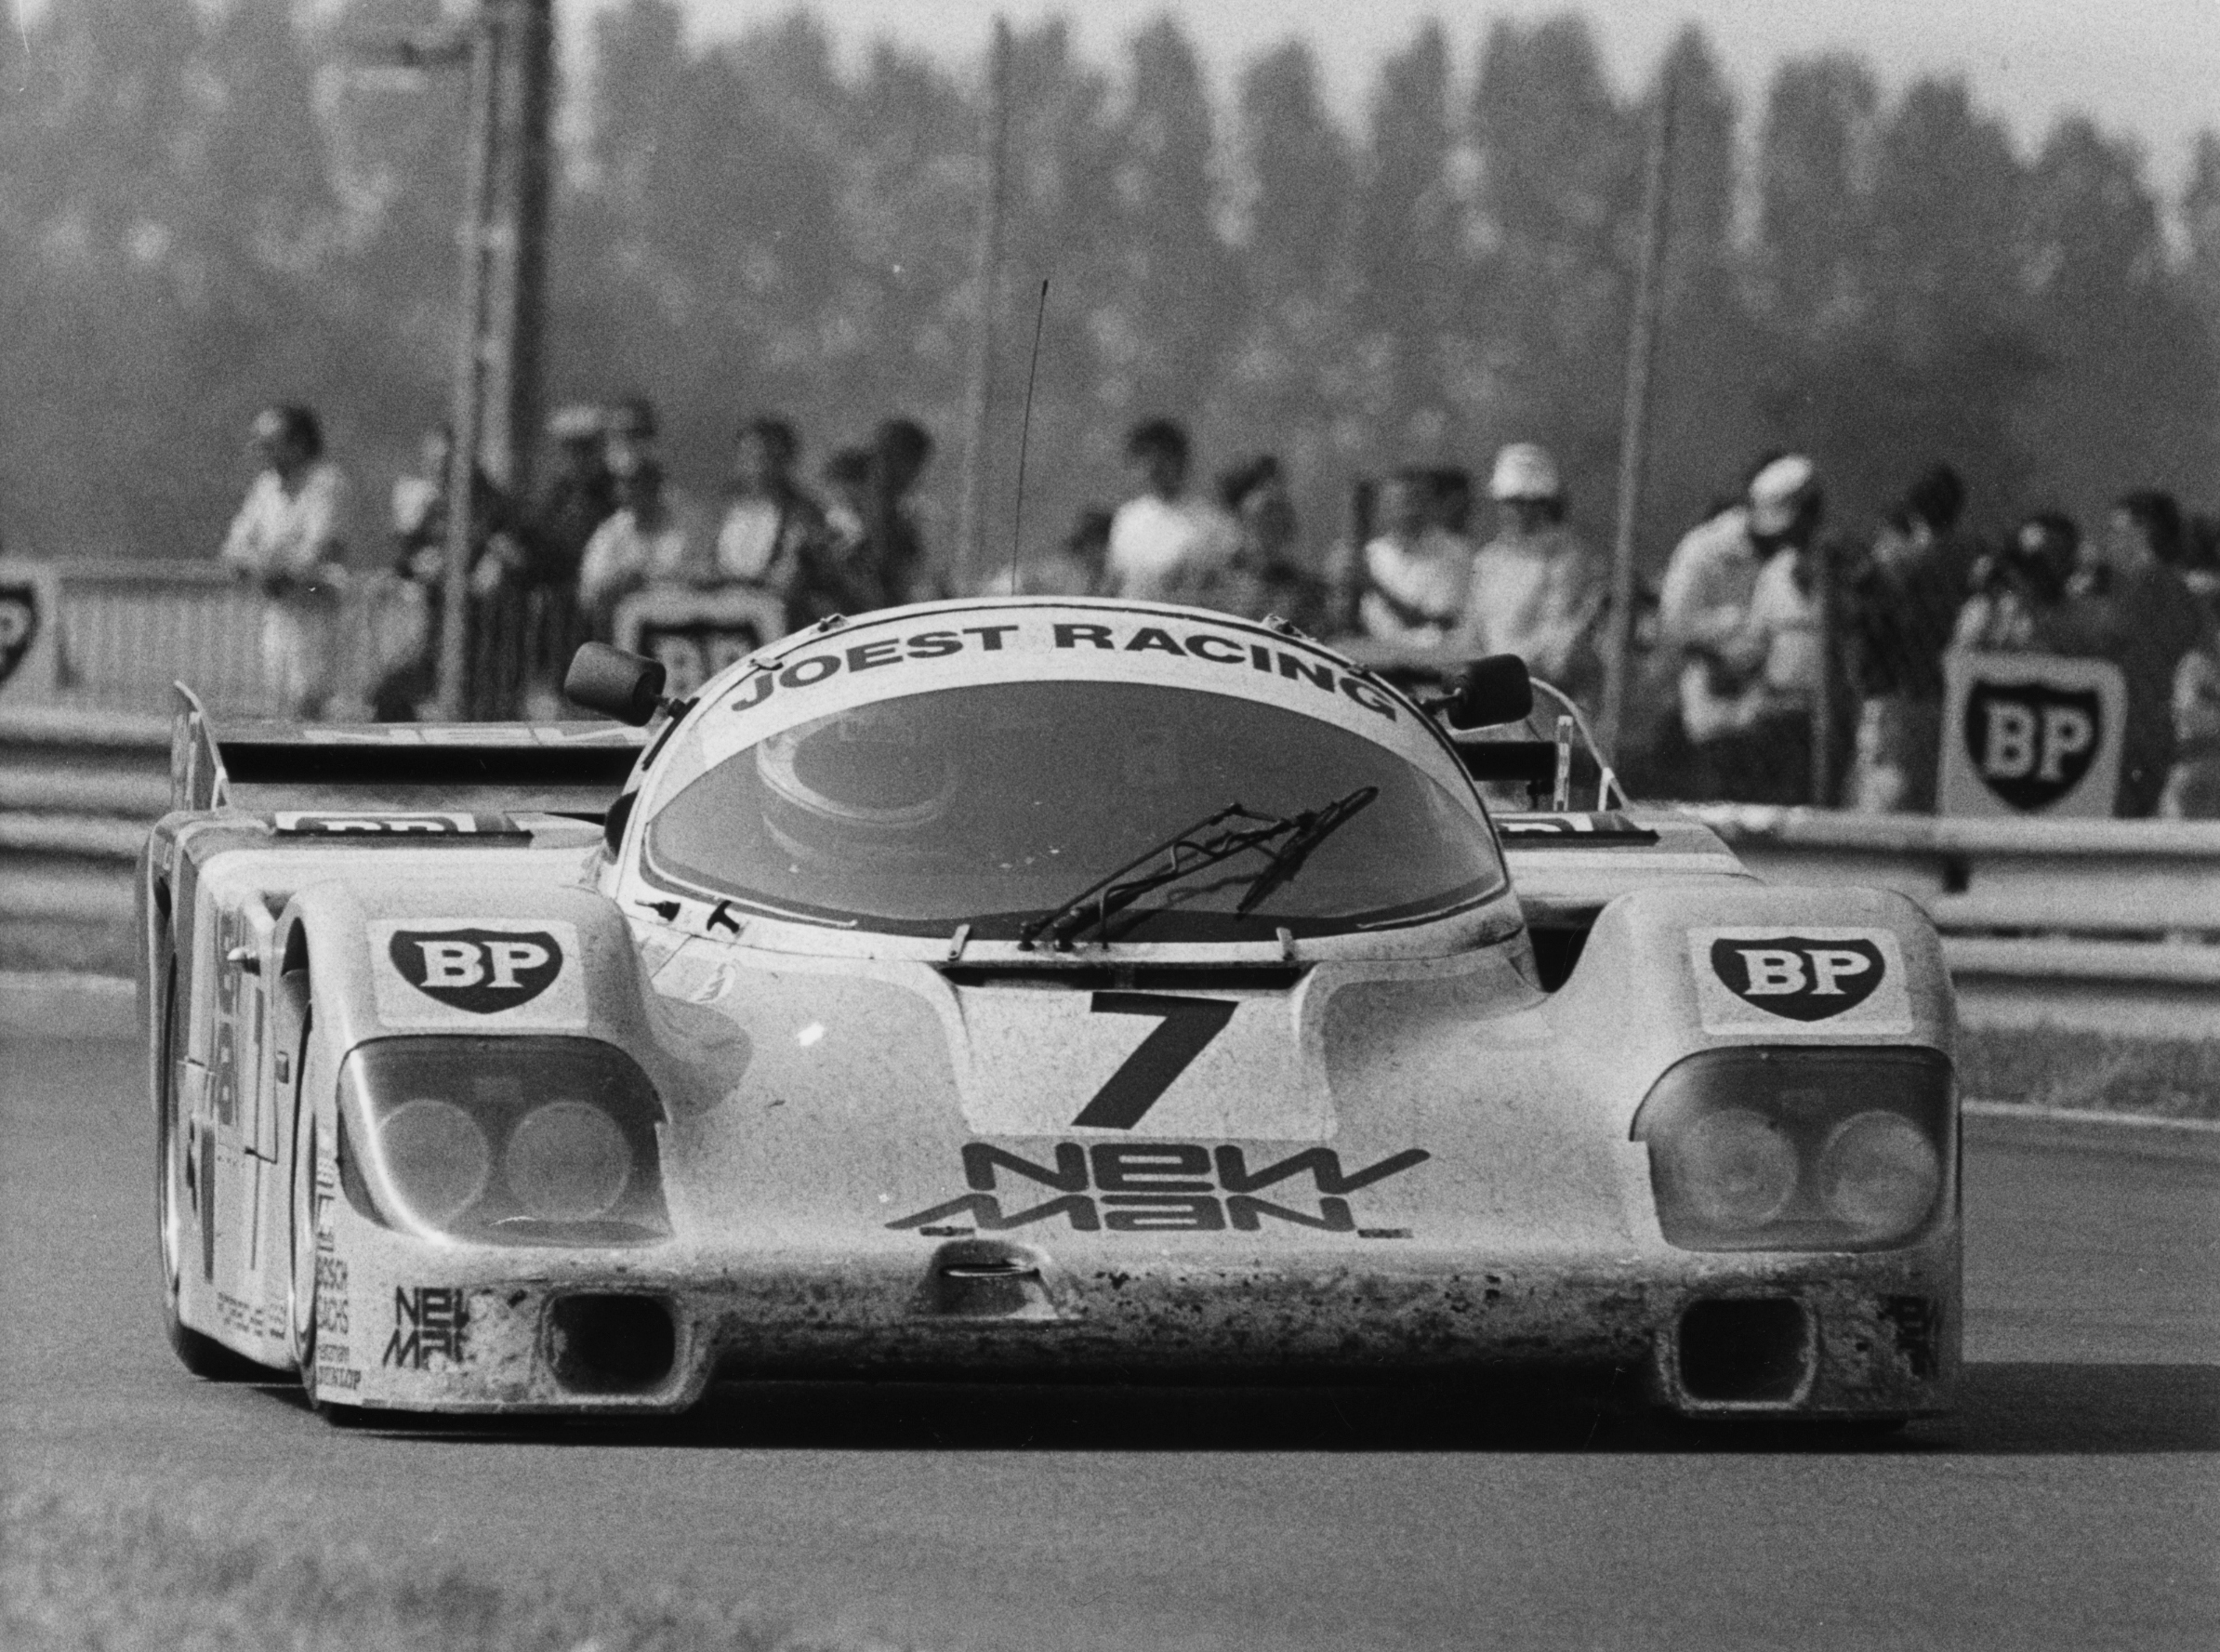 The chassis 956-117 achieved the rare feat of two victories at the 24 Hours.